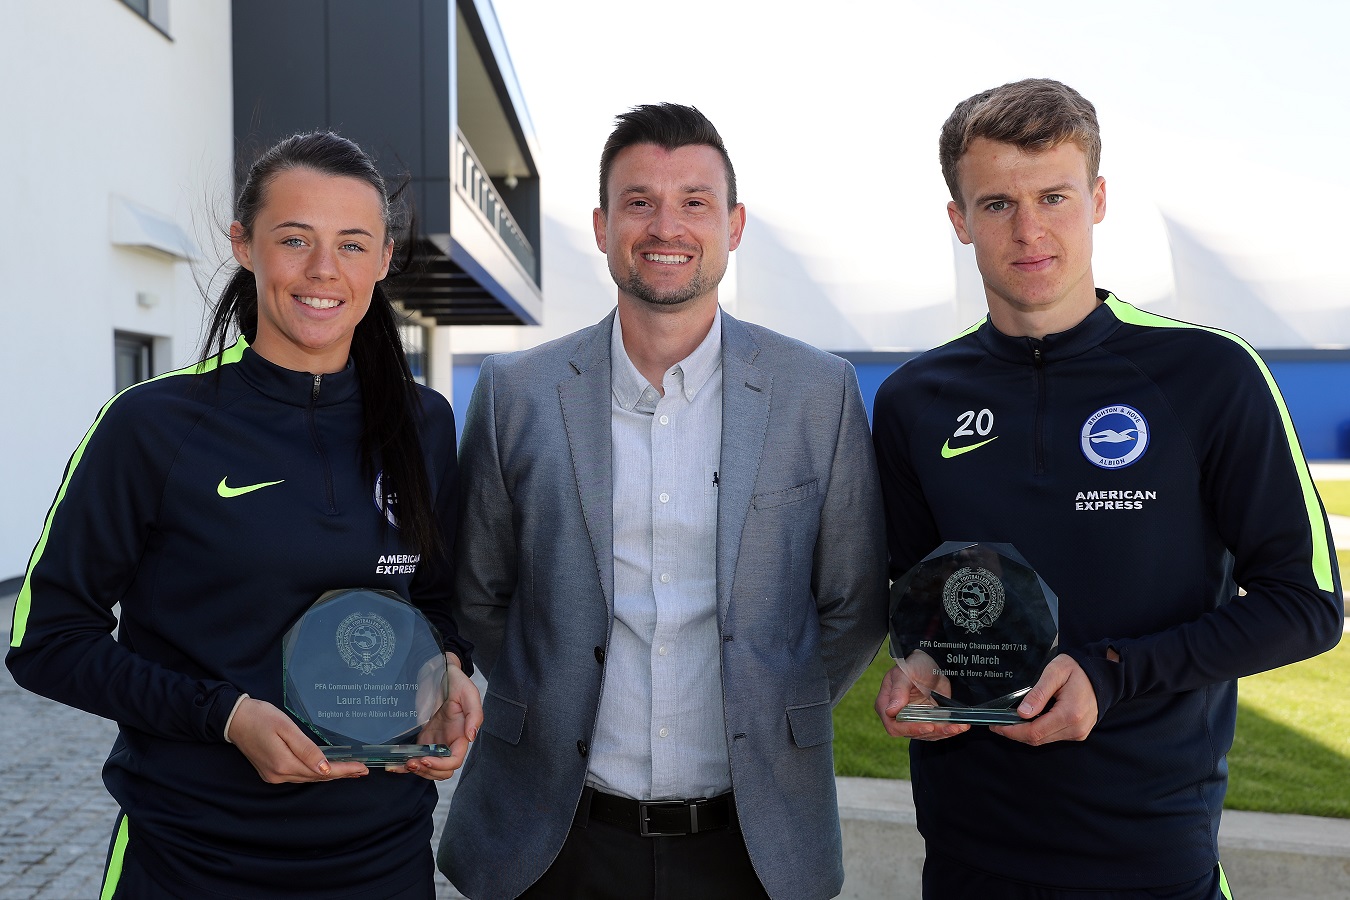 Laura Rafferty and Solly March have been given PFA Community Champion award...